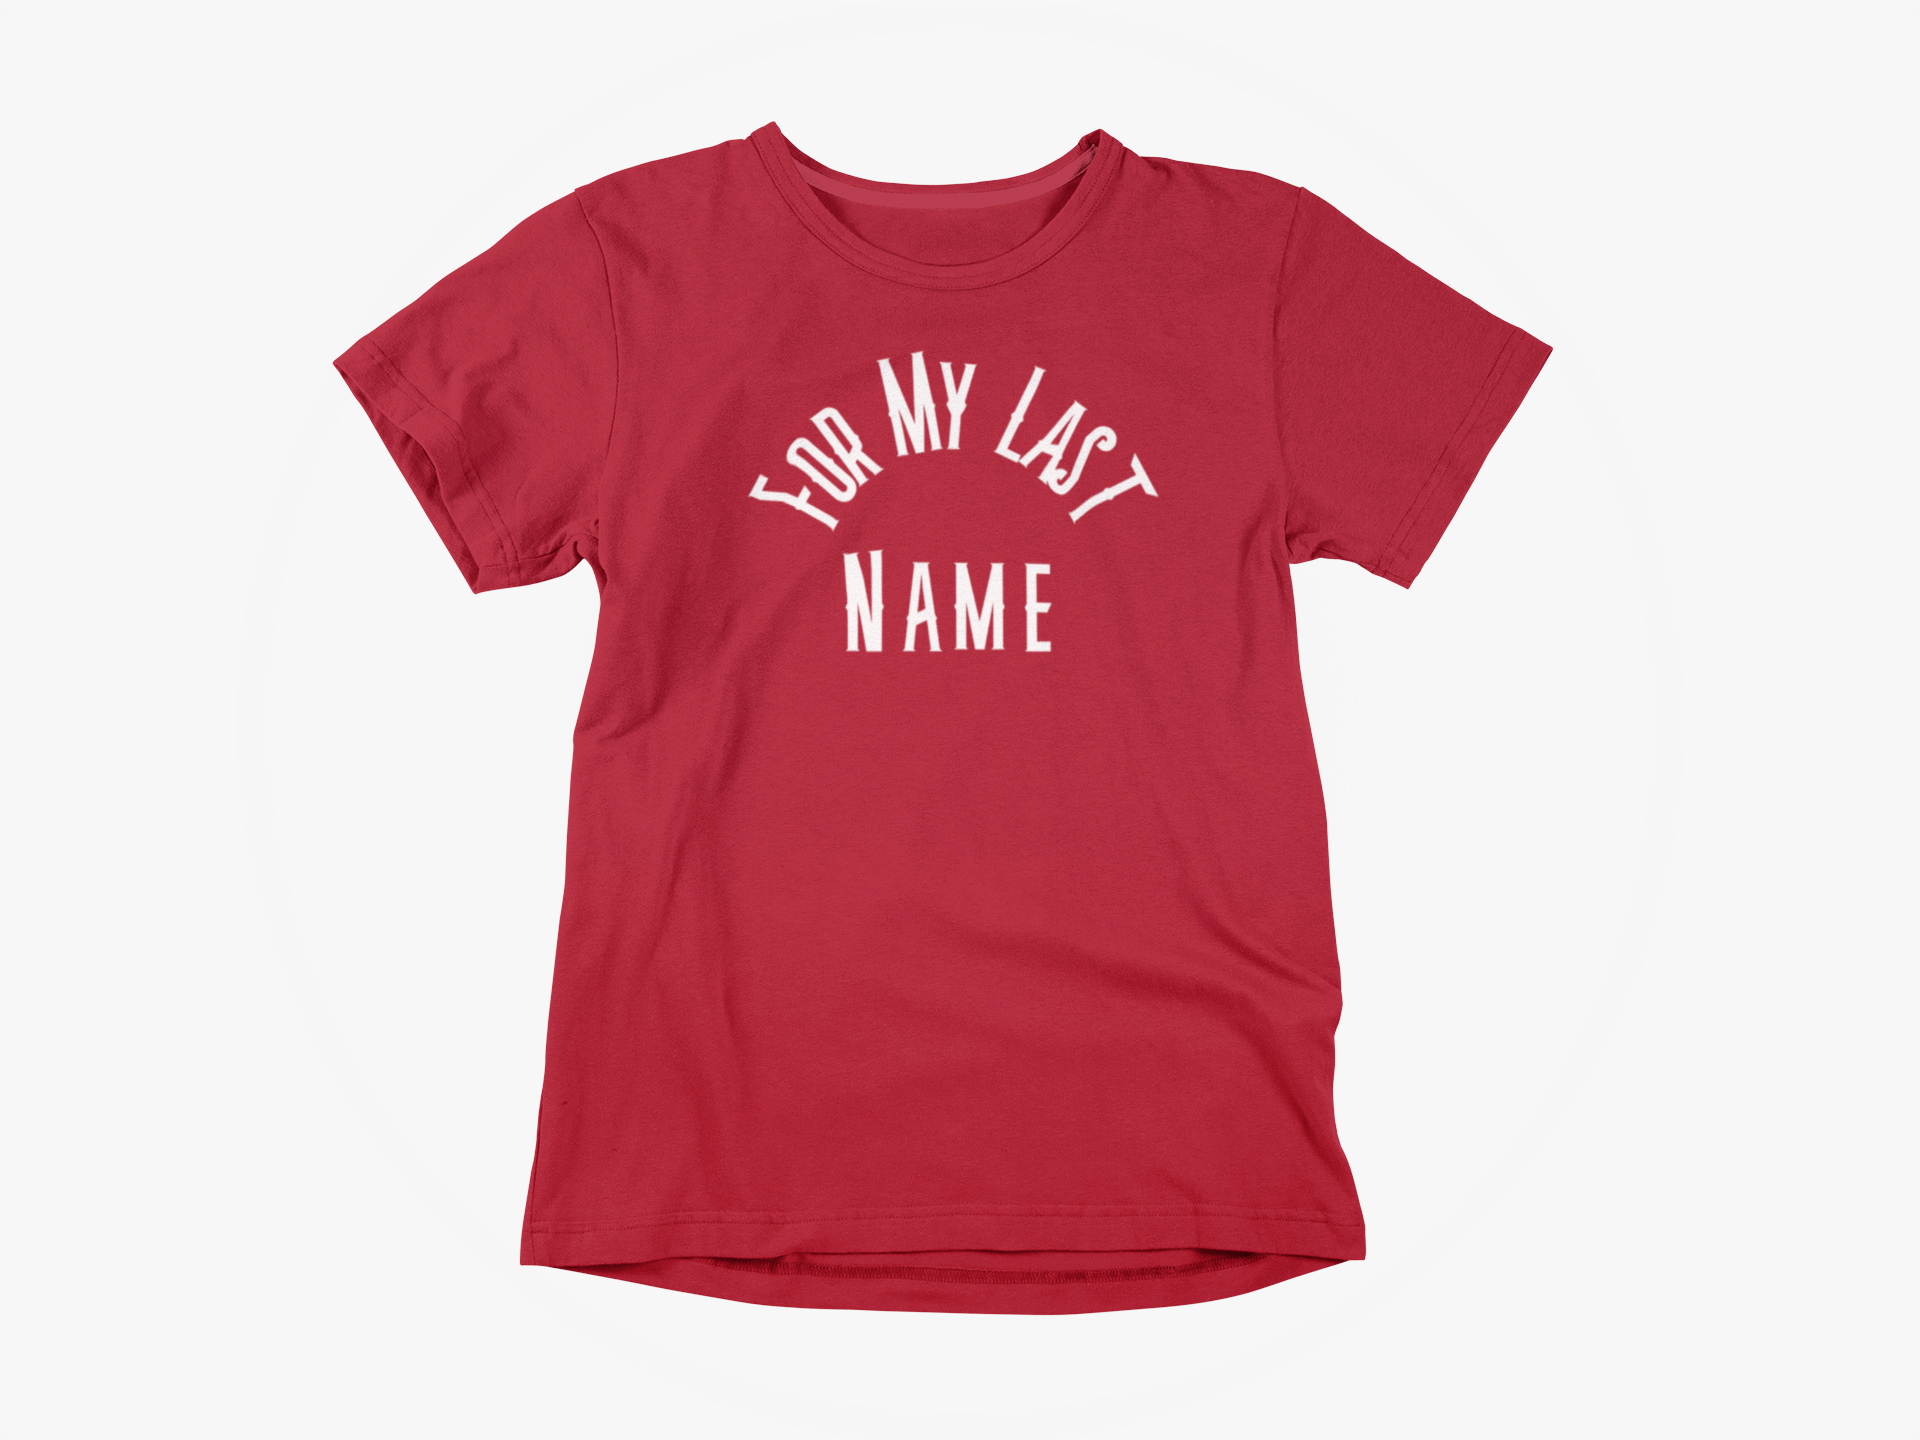 'For My Last Name' Short-Sleeve T-Shirt